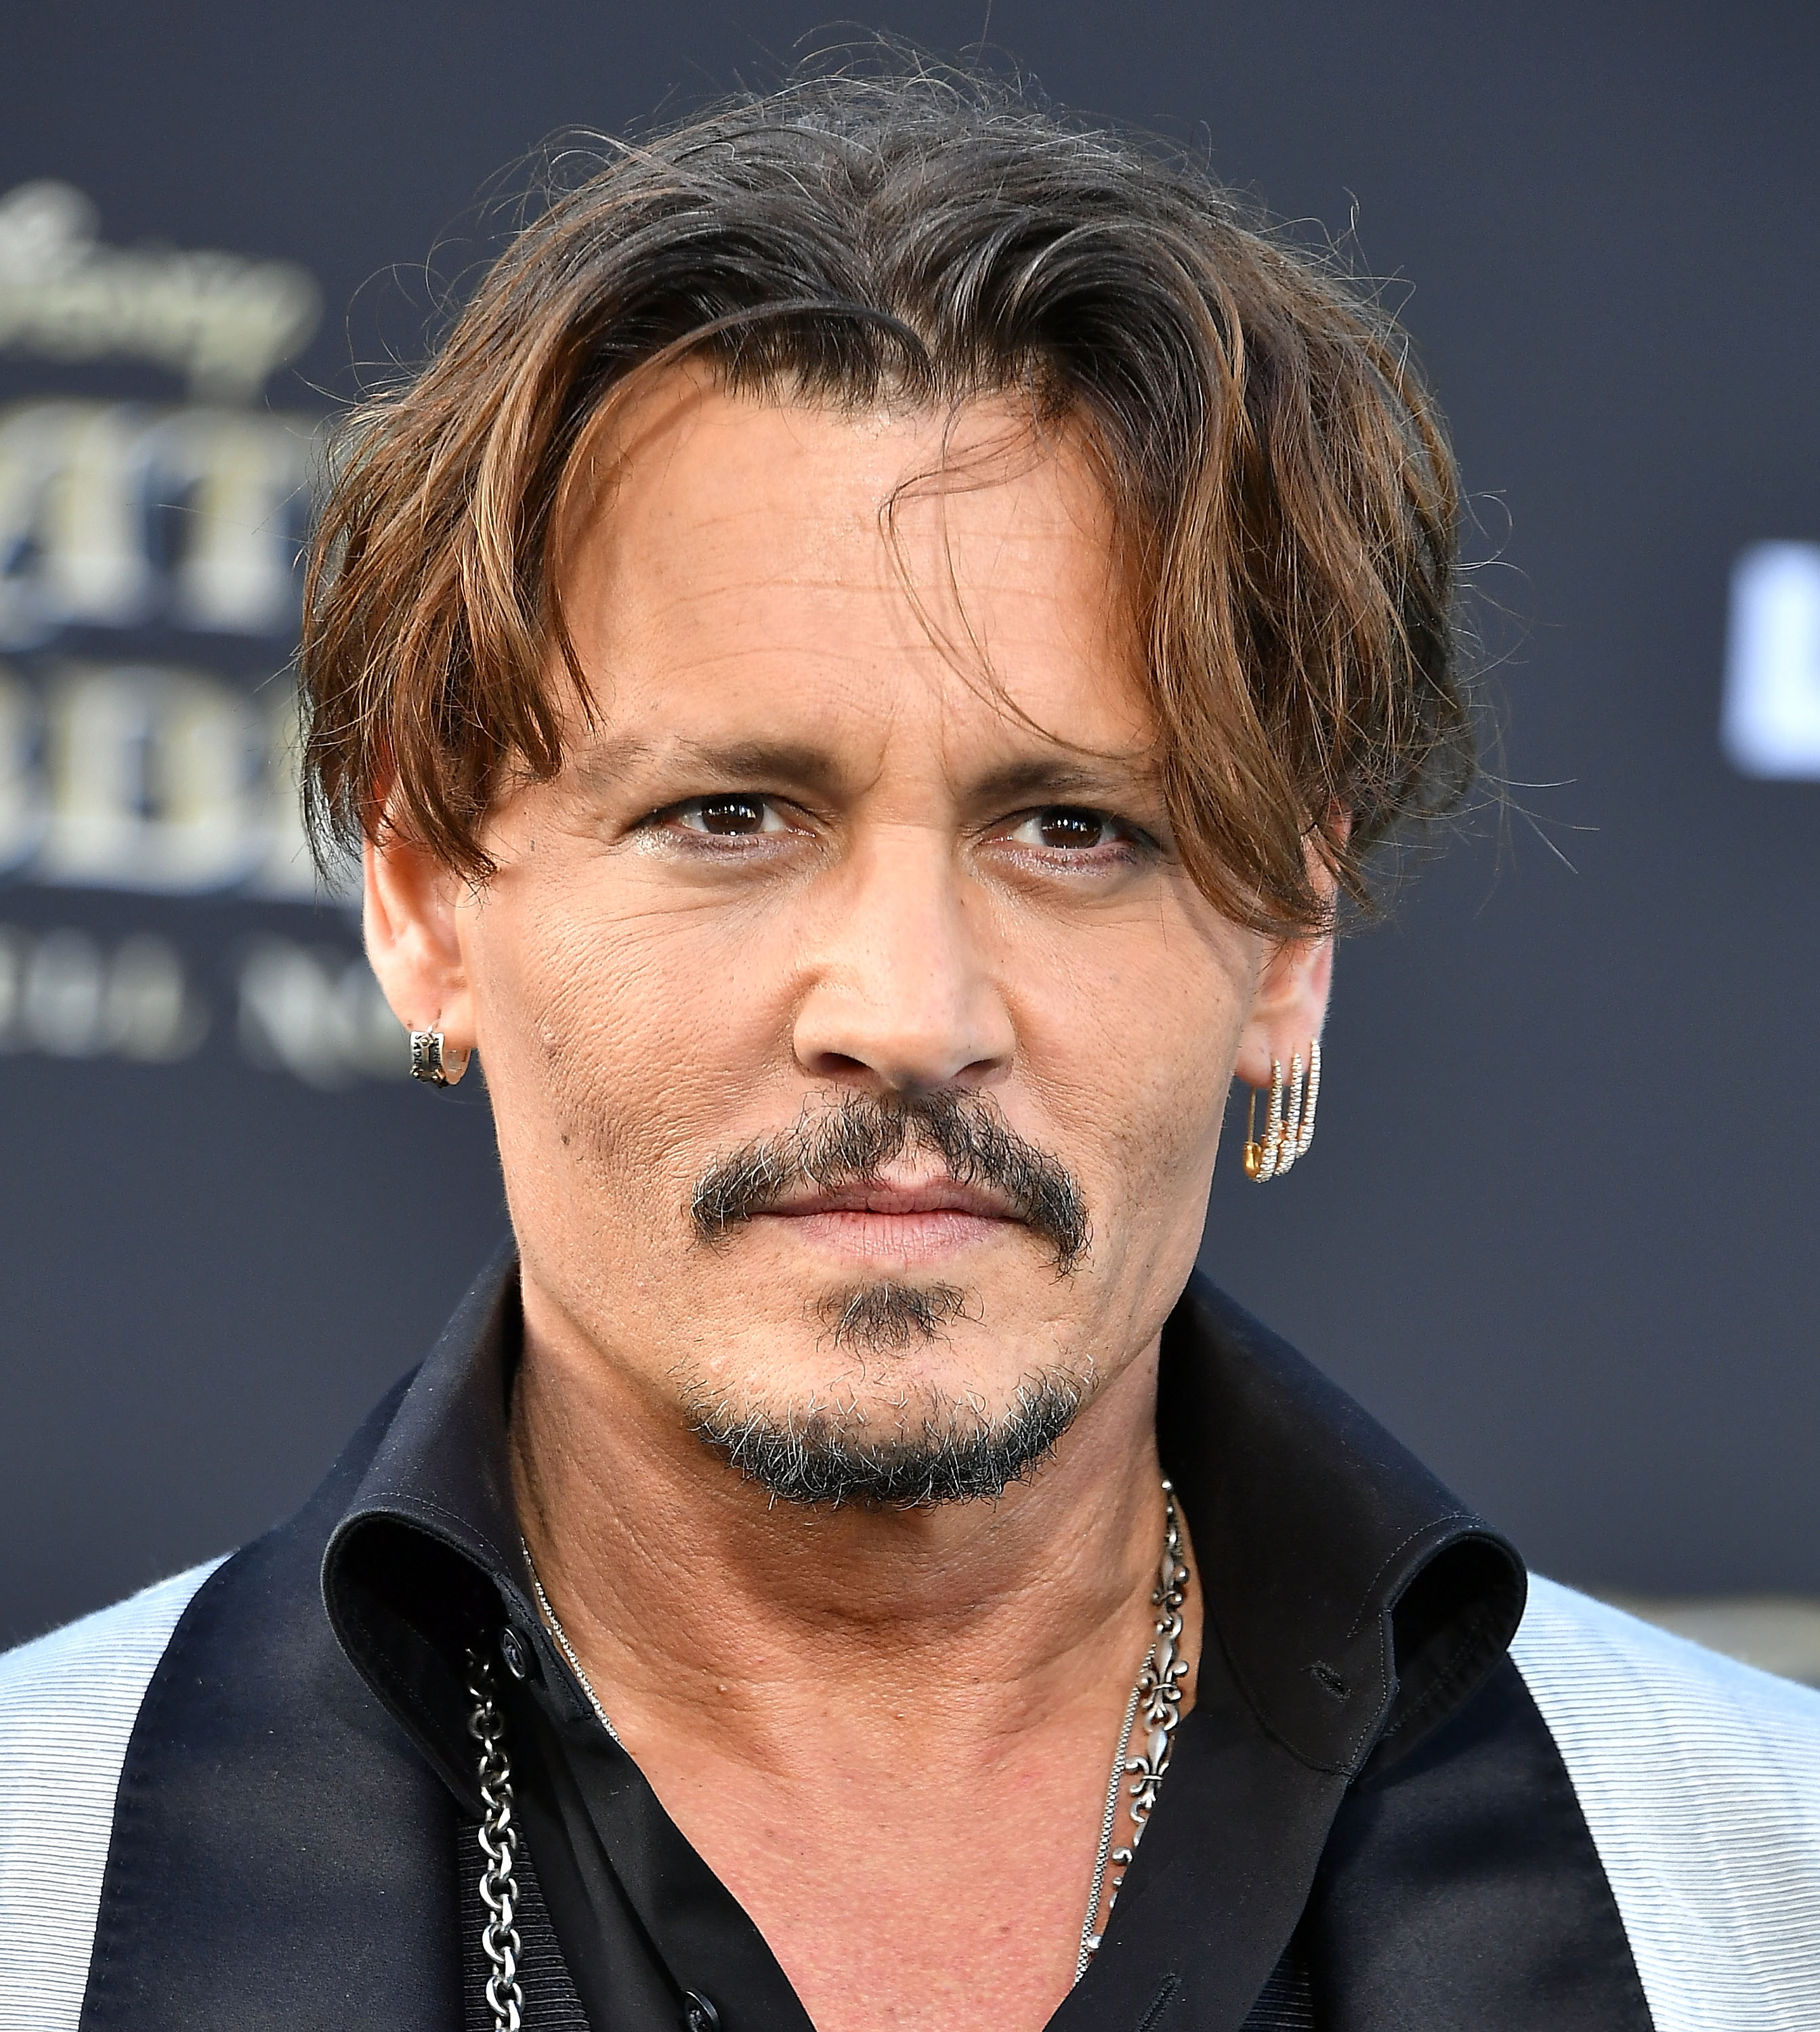 Johnny Depp attends the premiere of Disney's "Pirates Of The Caribbean: Dead Men Tell No Tales" on May 18, 2017, in Hollywood, California | Source: Getty Images